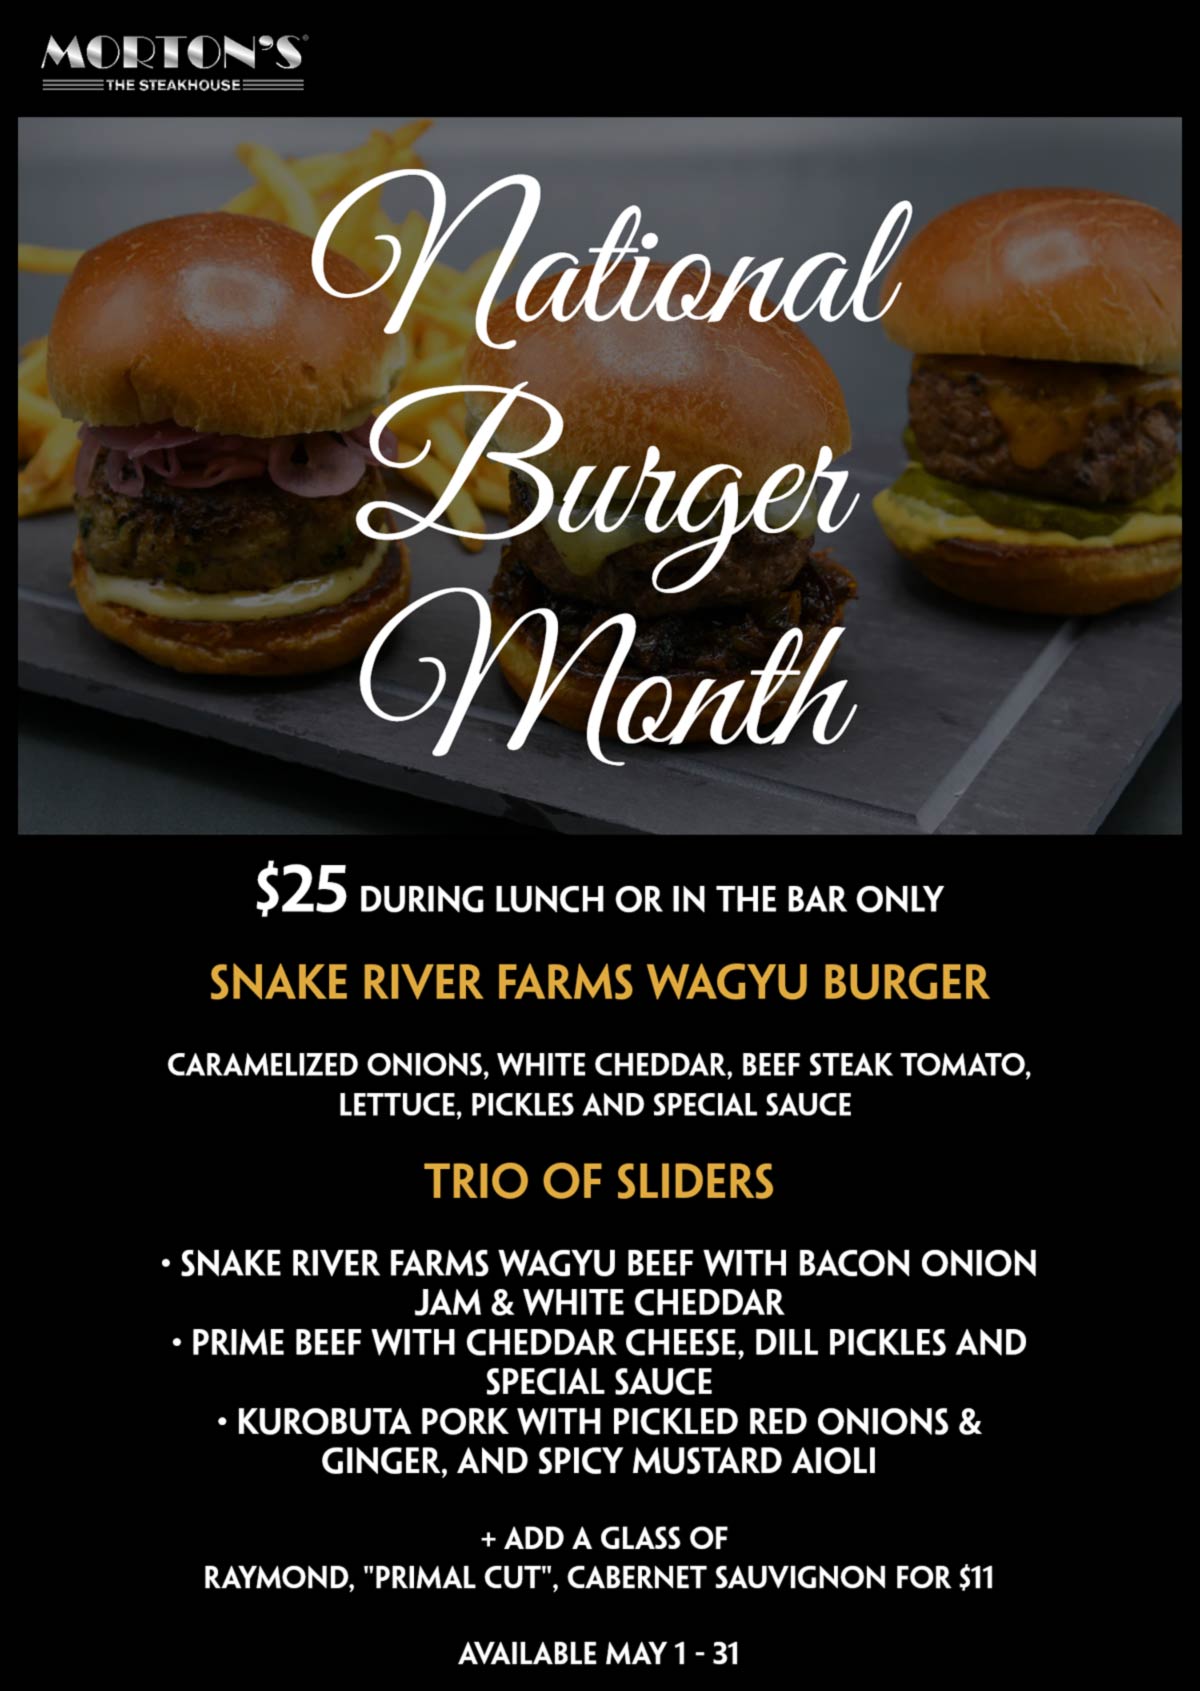 Mortons restaurants Coupon  $25 wagyu cheeseburger all month in bar or at lunch at Mortons Steakhouse #mortons 